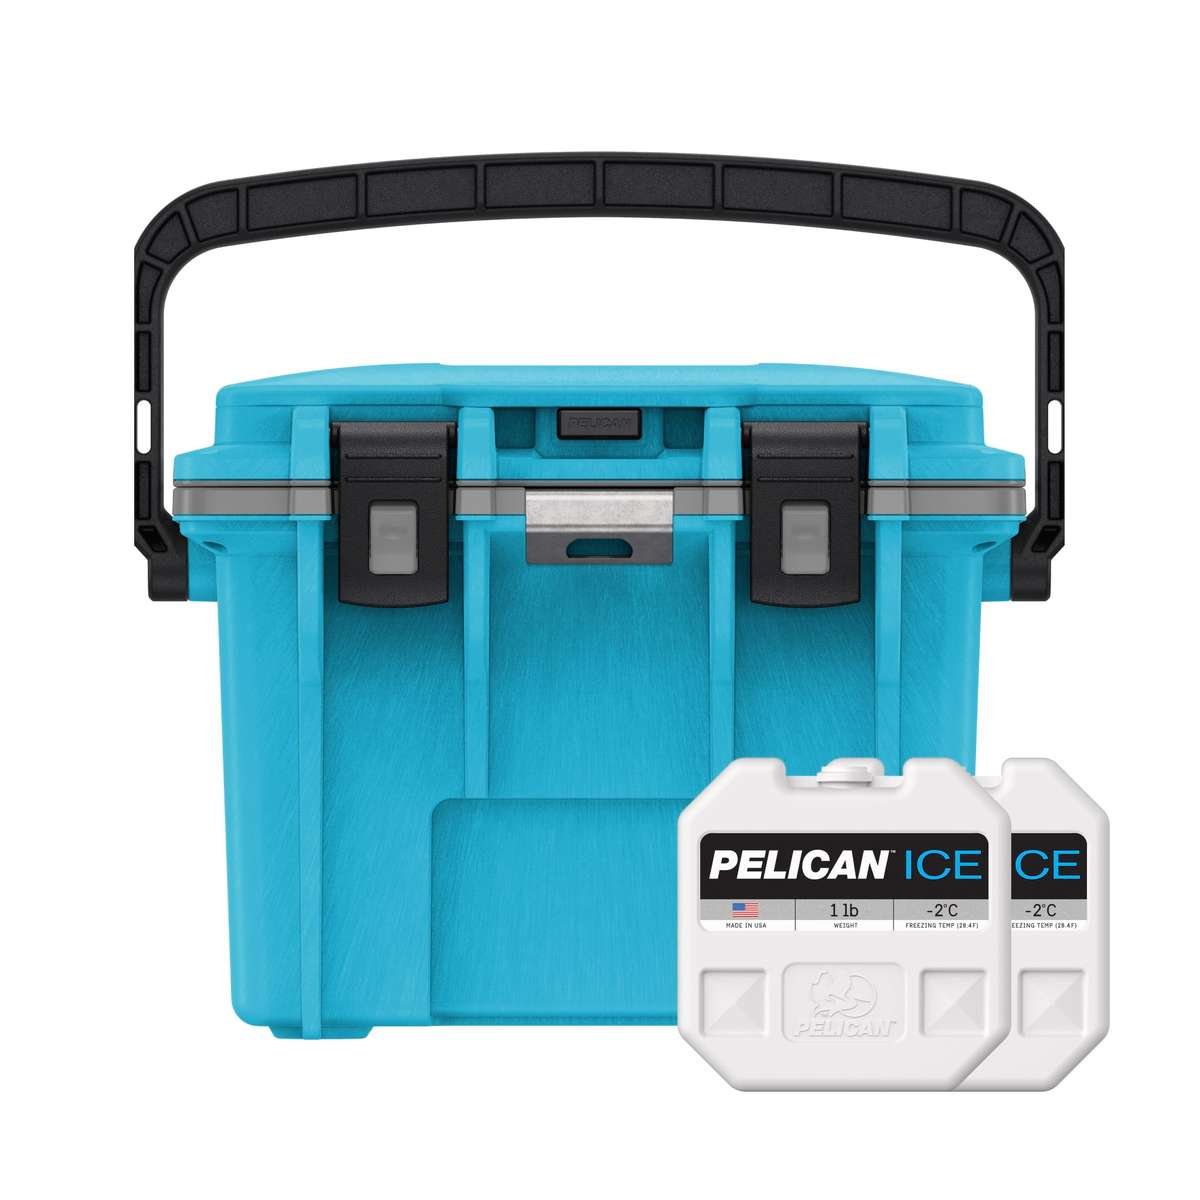 14QT Cool Blue/Grey Personal Cooler with two free 1lb Pelican Ice packs